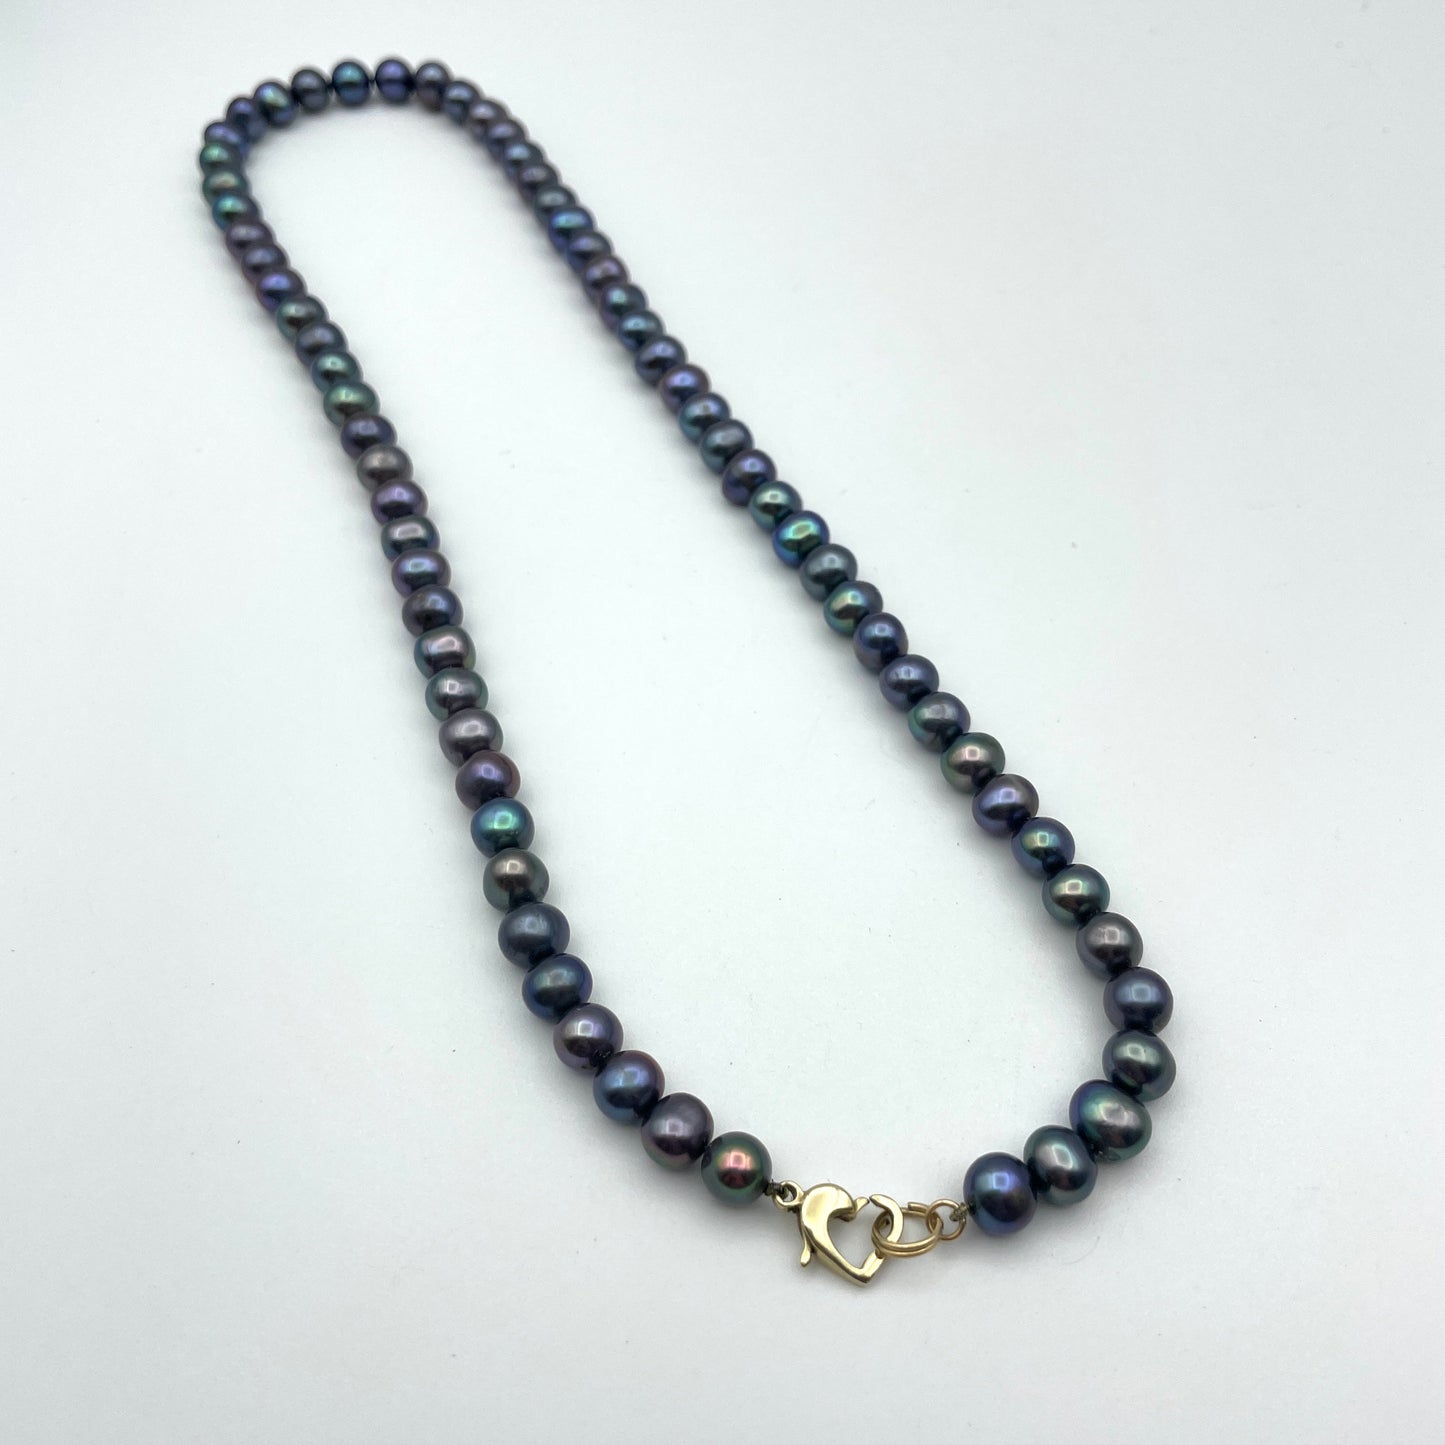 Beautiful Dark Pearl Necklace with 14k Gold Heart Clasp